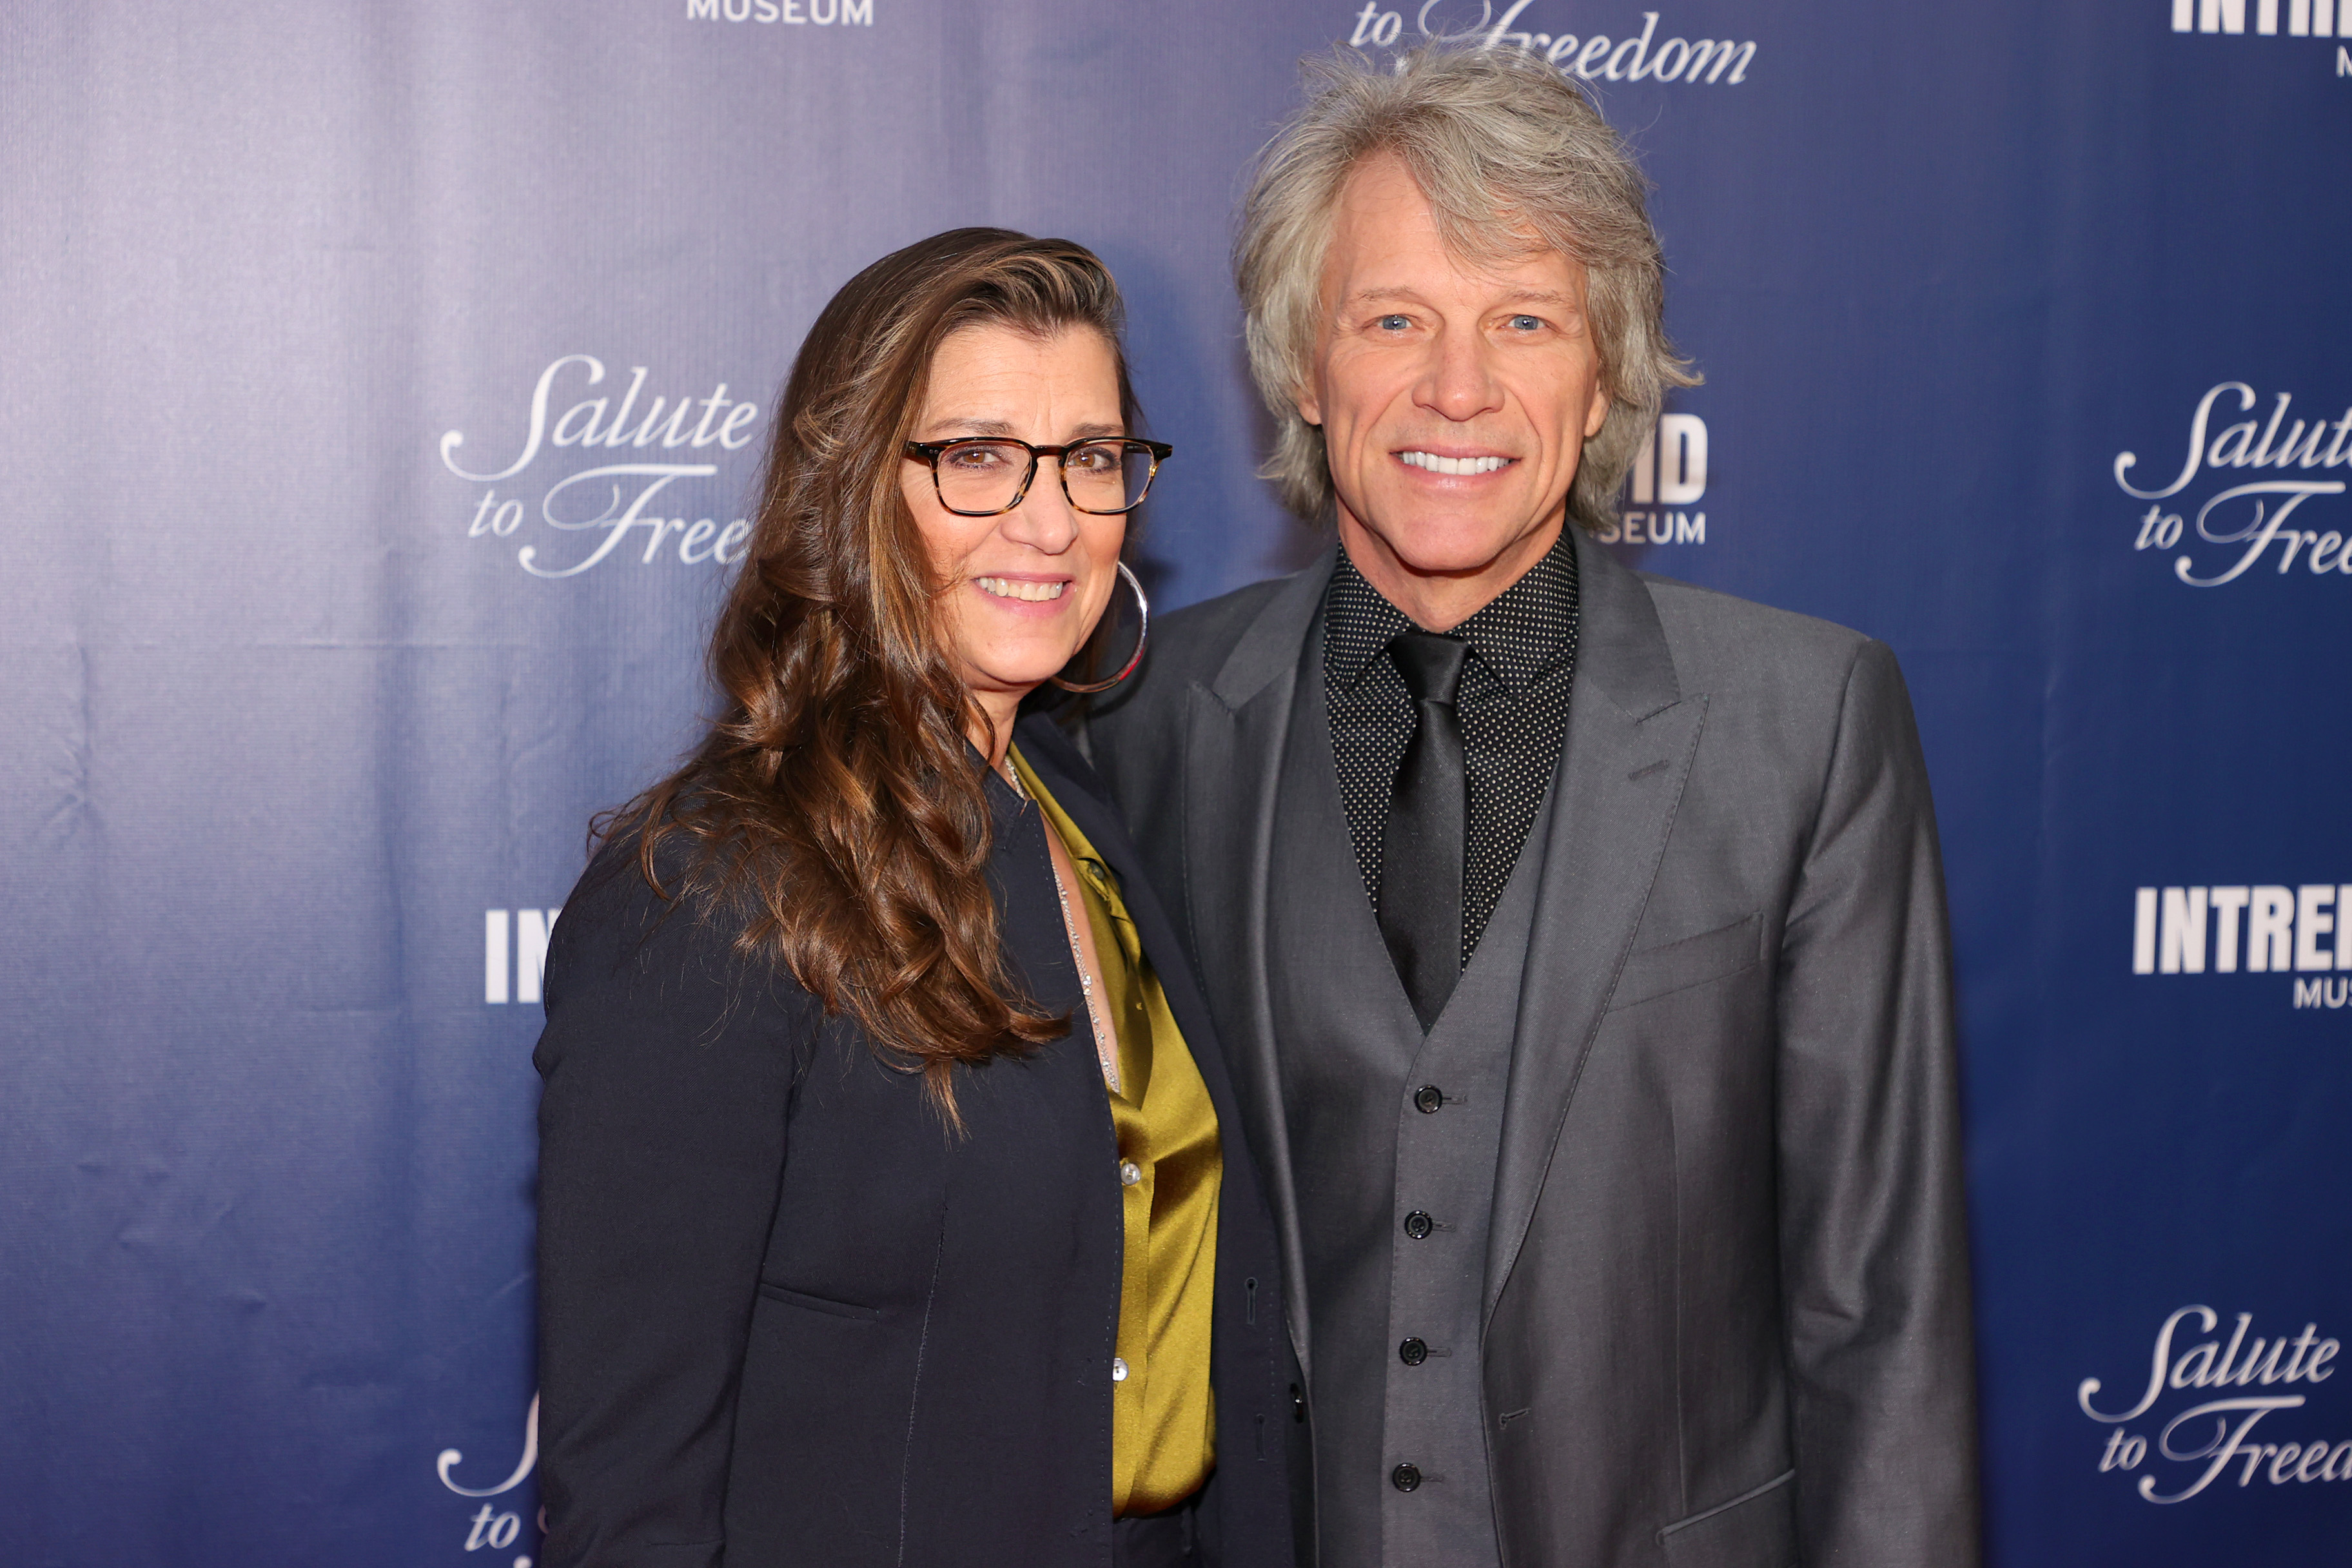 Dorothea Bongiovi and Jon Bon Jovi attend as Intrepid Museum hosts Annual Salute To Freedom in New York City Gala on November 10, 2021. | Source: Getty Images